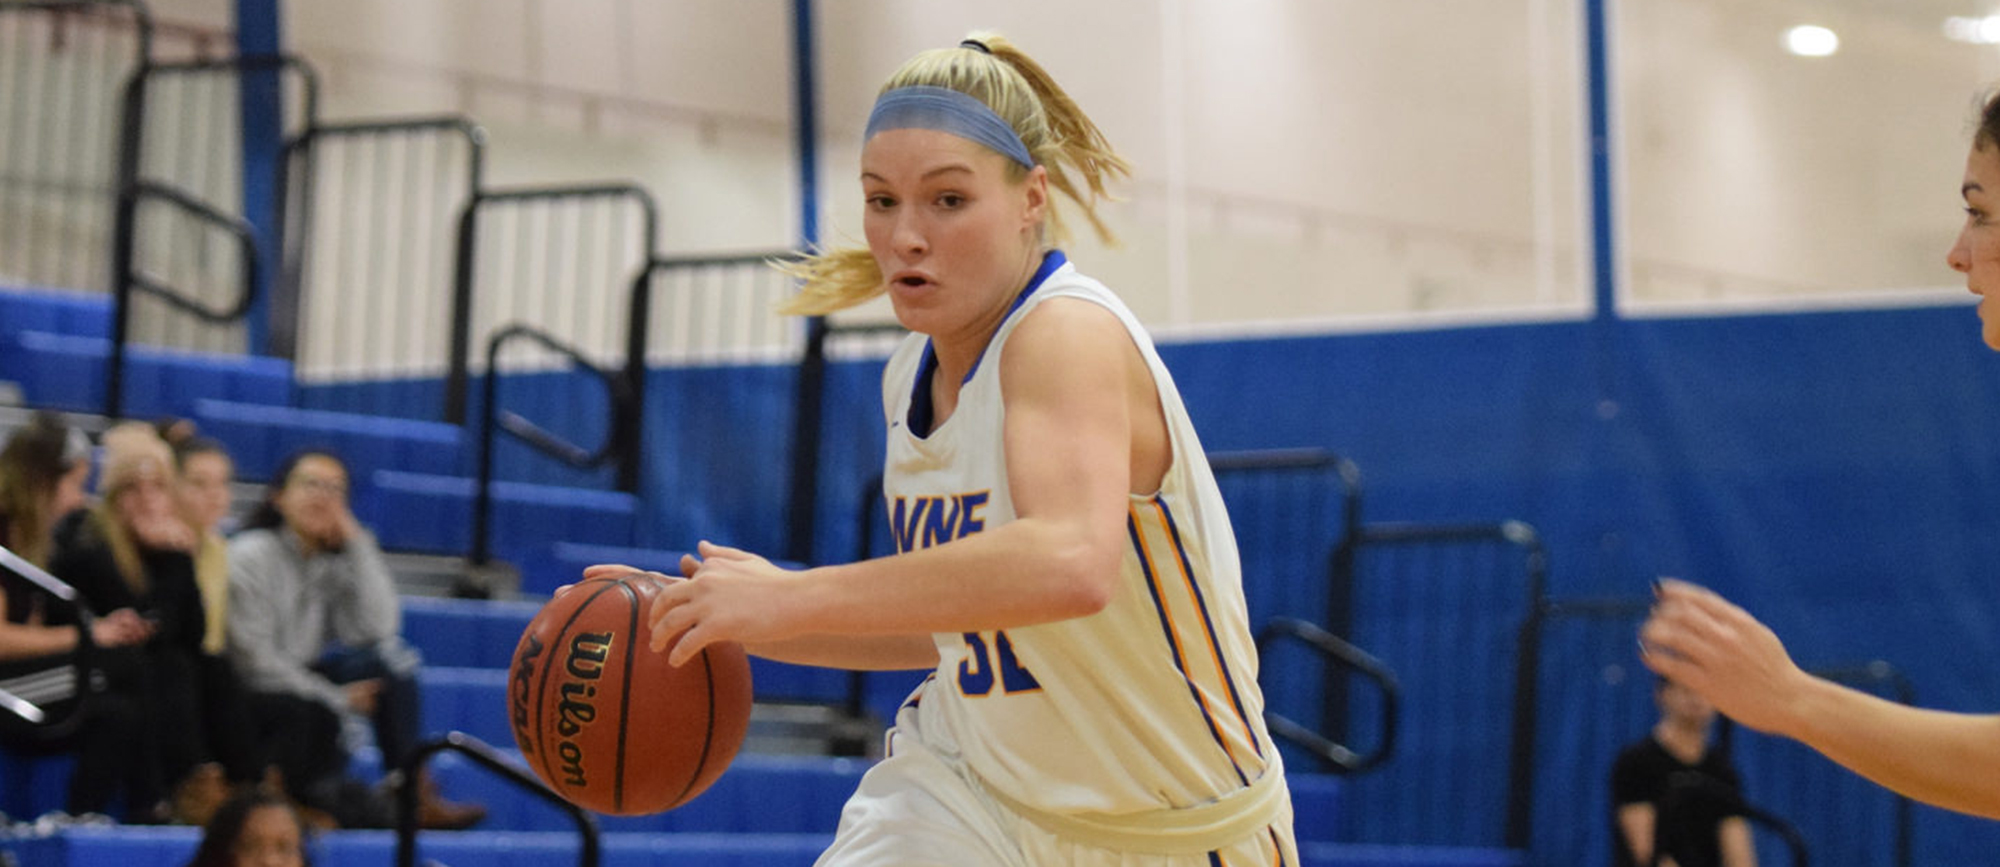 Courtney Carlson led the Golden Bears with 20 points as WNE defeated UNE 67-59 on the road in the CCC Tournament semifinals on Thursday night. (Photo by Rachael Margossian)